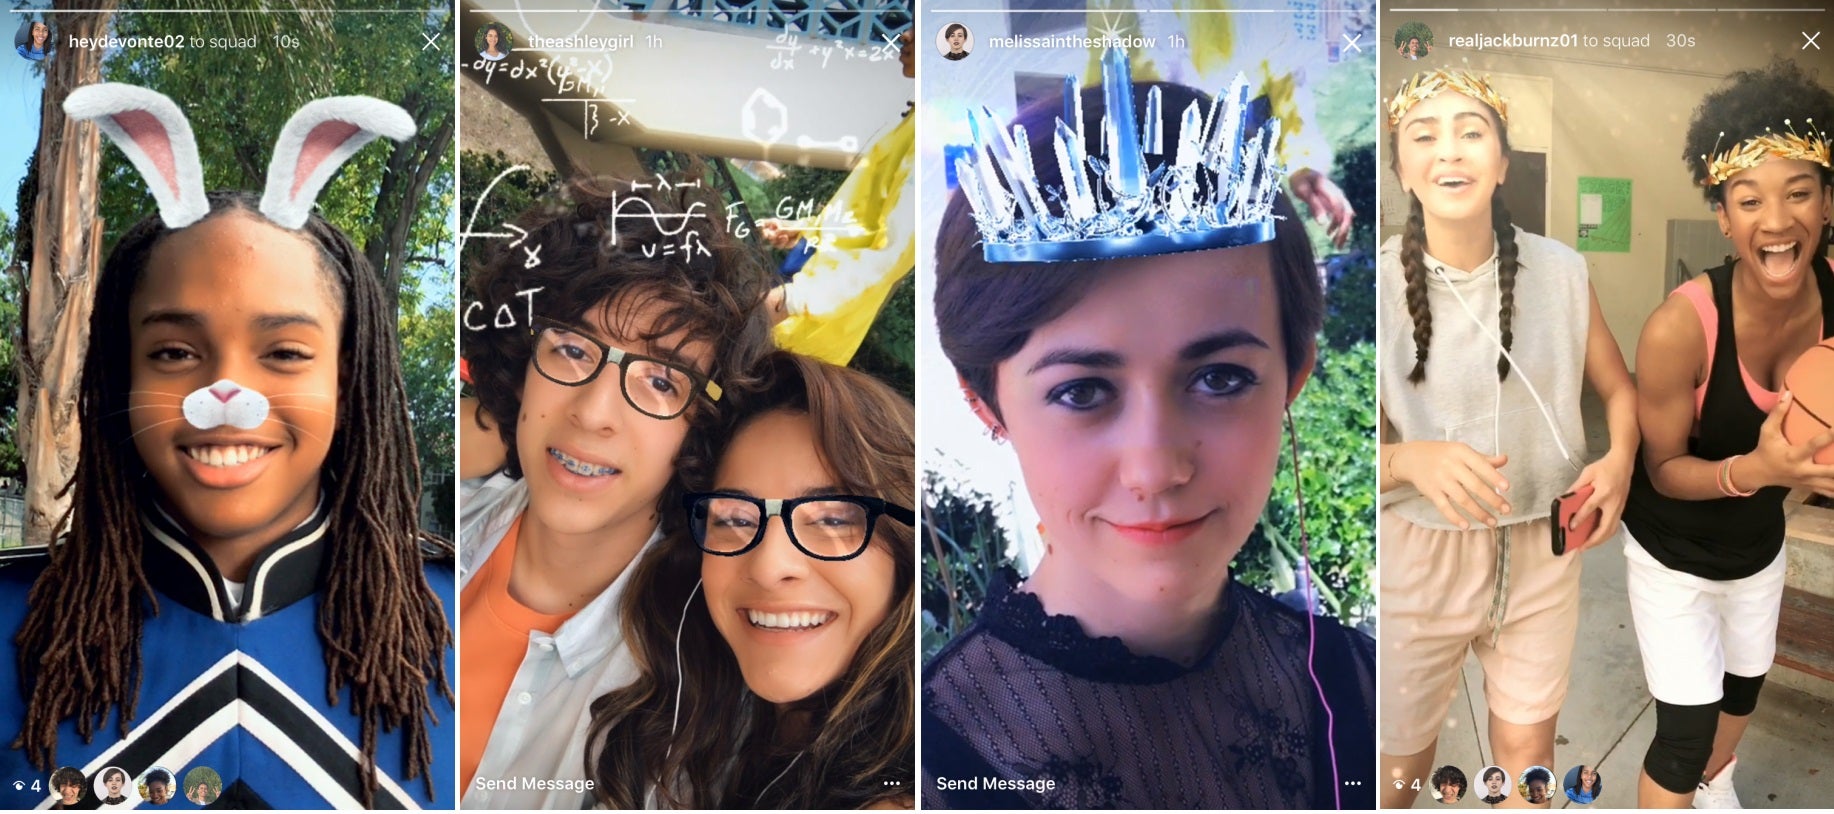 Instagram Finally Introduces Snapchat-like Face Filters and Other New Cool Functions! - World Of Buzz 3